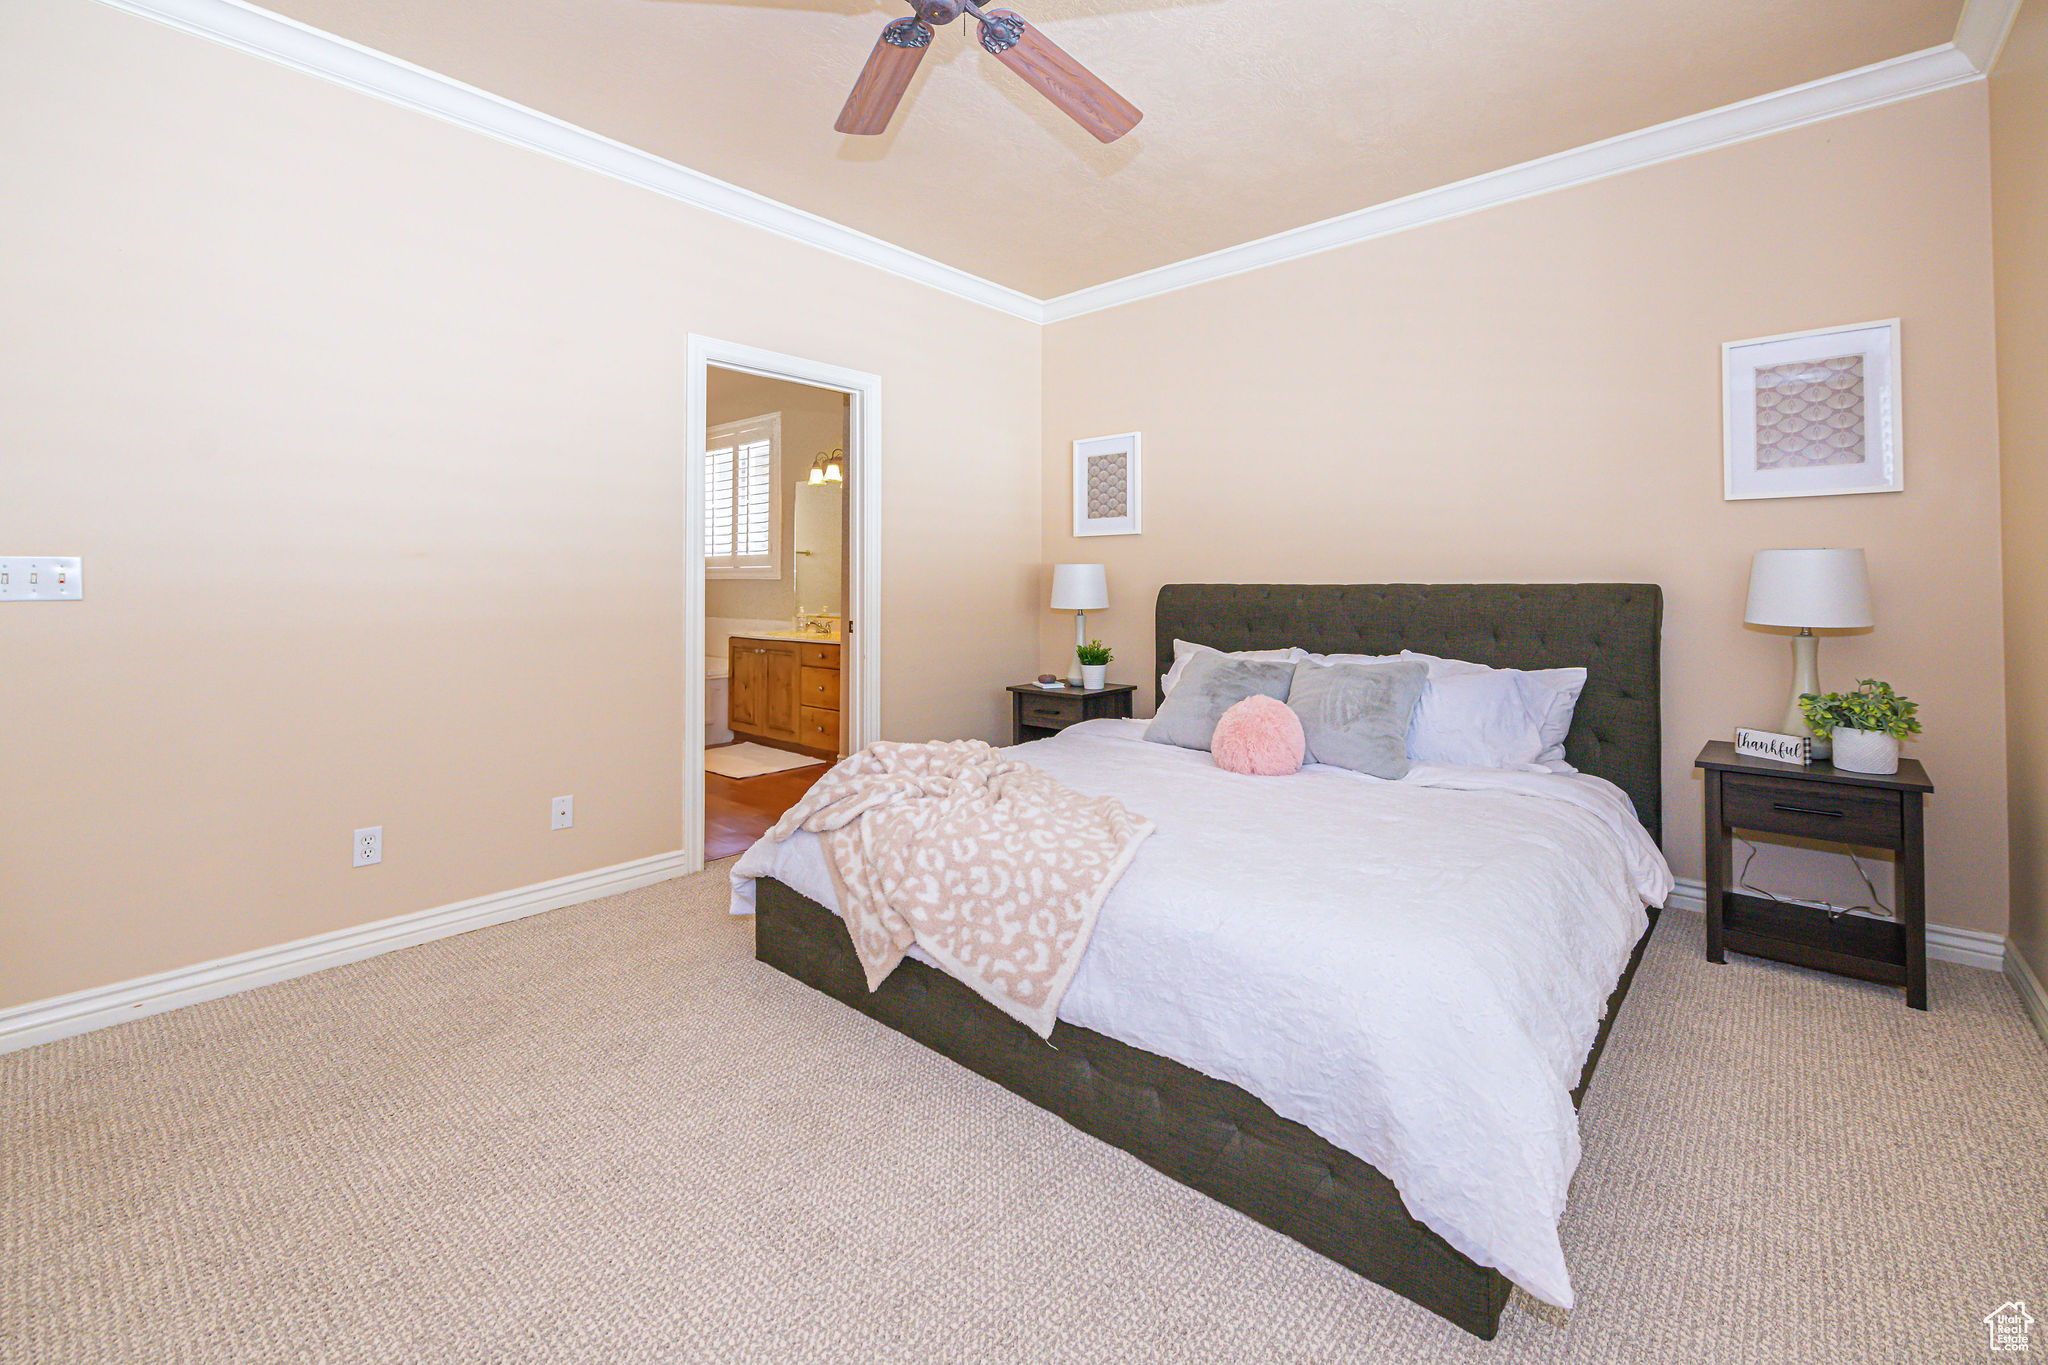 Carpeted bedroom with ornamental molding, ceiling fan, and ensuite bathroom